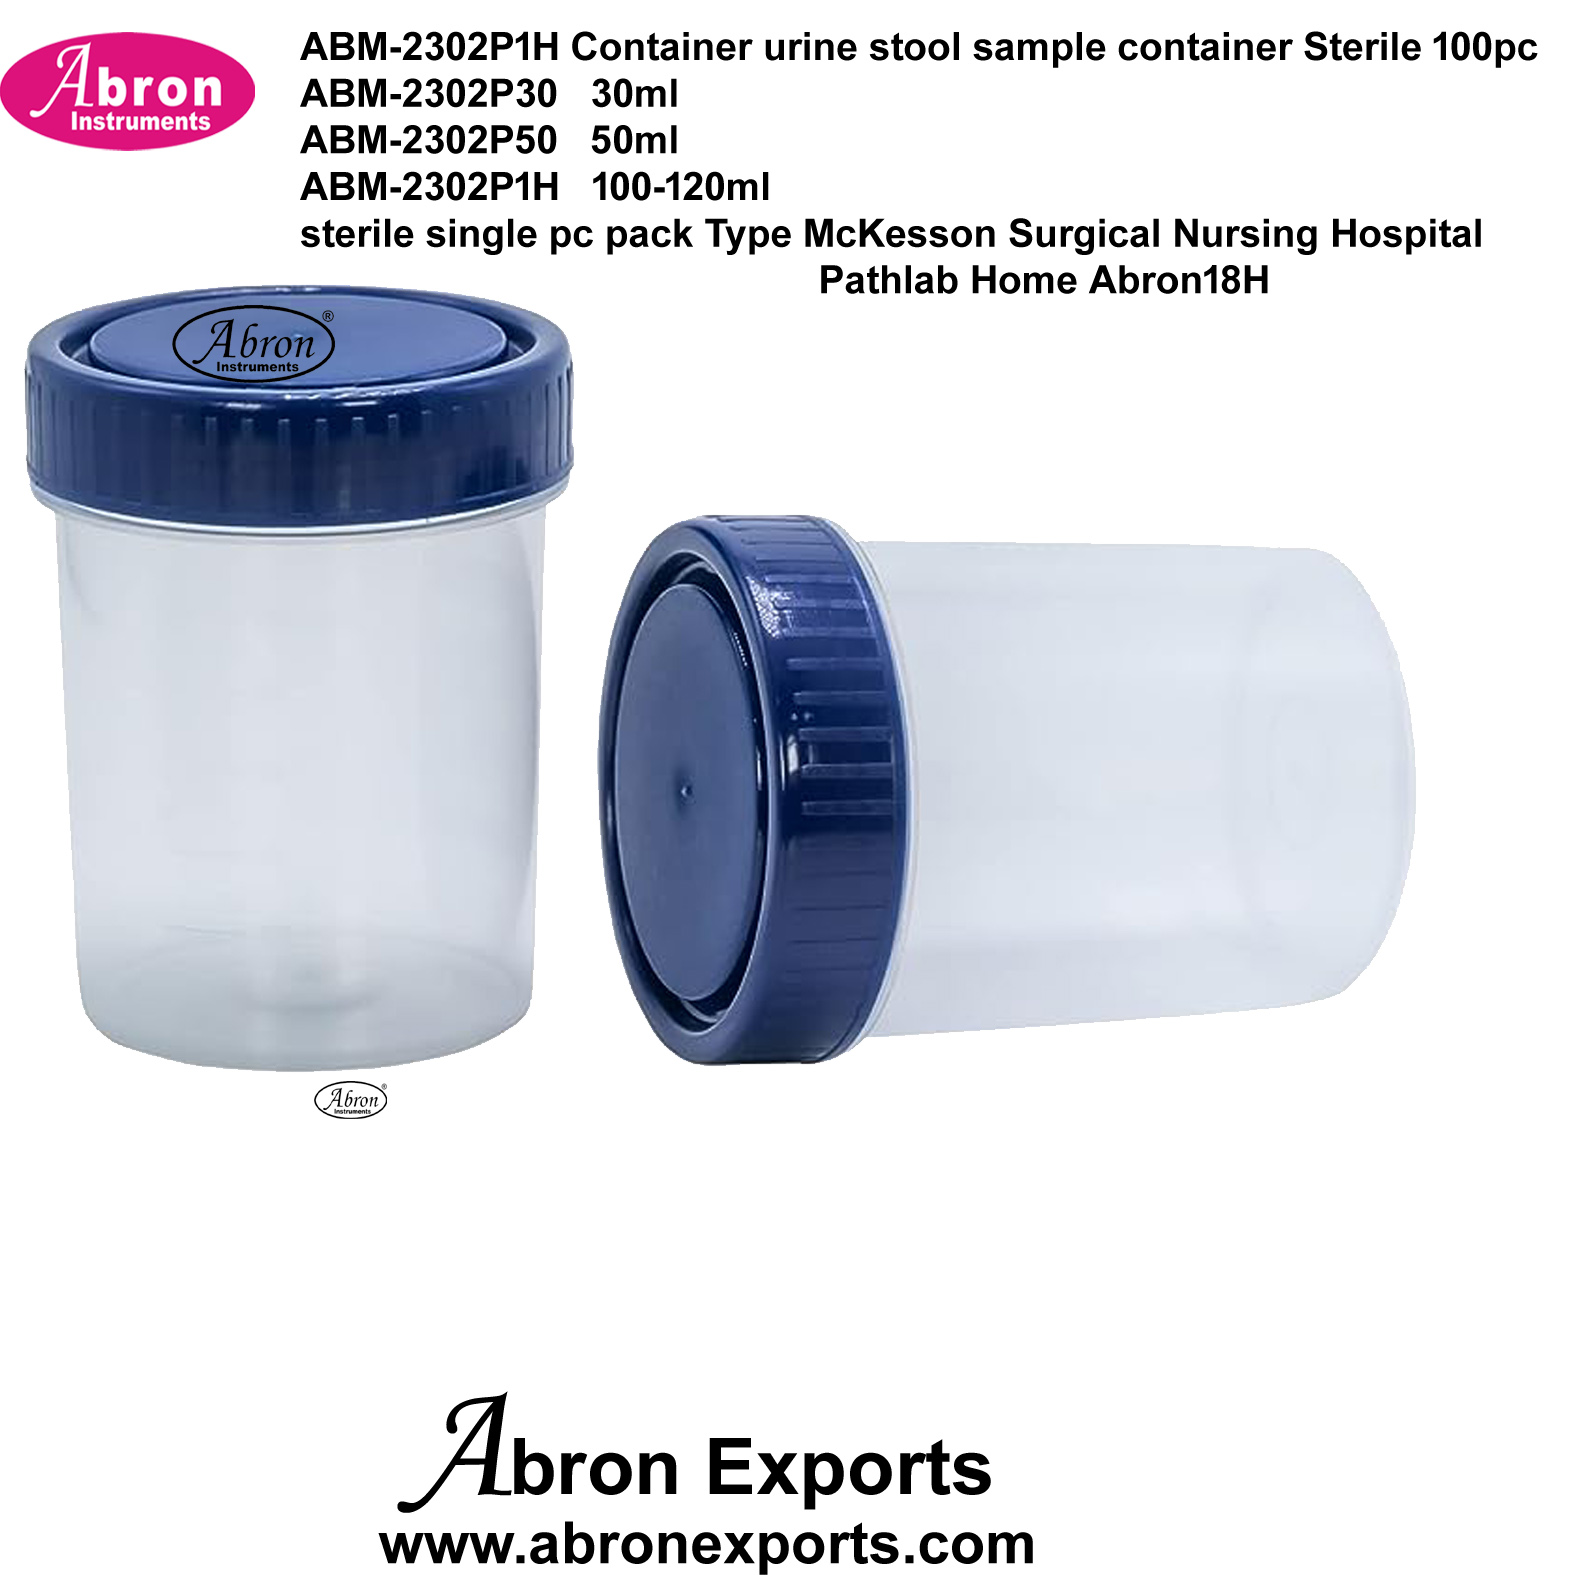 Container Urine Stool Sample Container 100ml 120ml 100 pc Sterile Single pc Pack Type McKesson Surgical Nursing Hospital Pathlab Home Abron ABM-2302P1H 